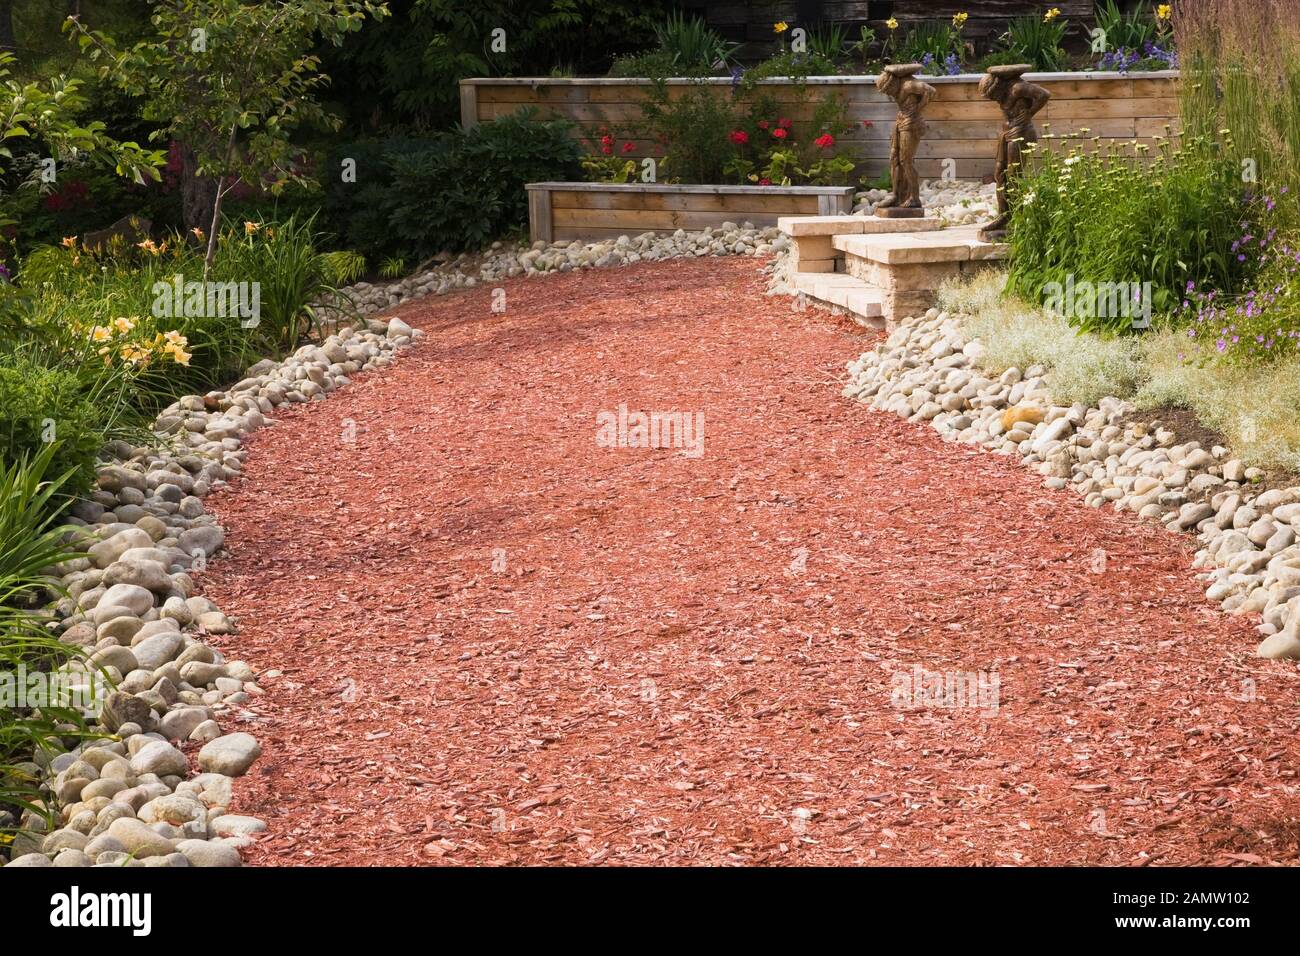 Rock edged red cedar mulch path and borders with yellow Hemerocallis - Daylily and white Leucanthemum vulgare - Oxeye Daisy flowers in backyard garden Stock Photo